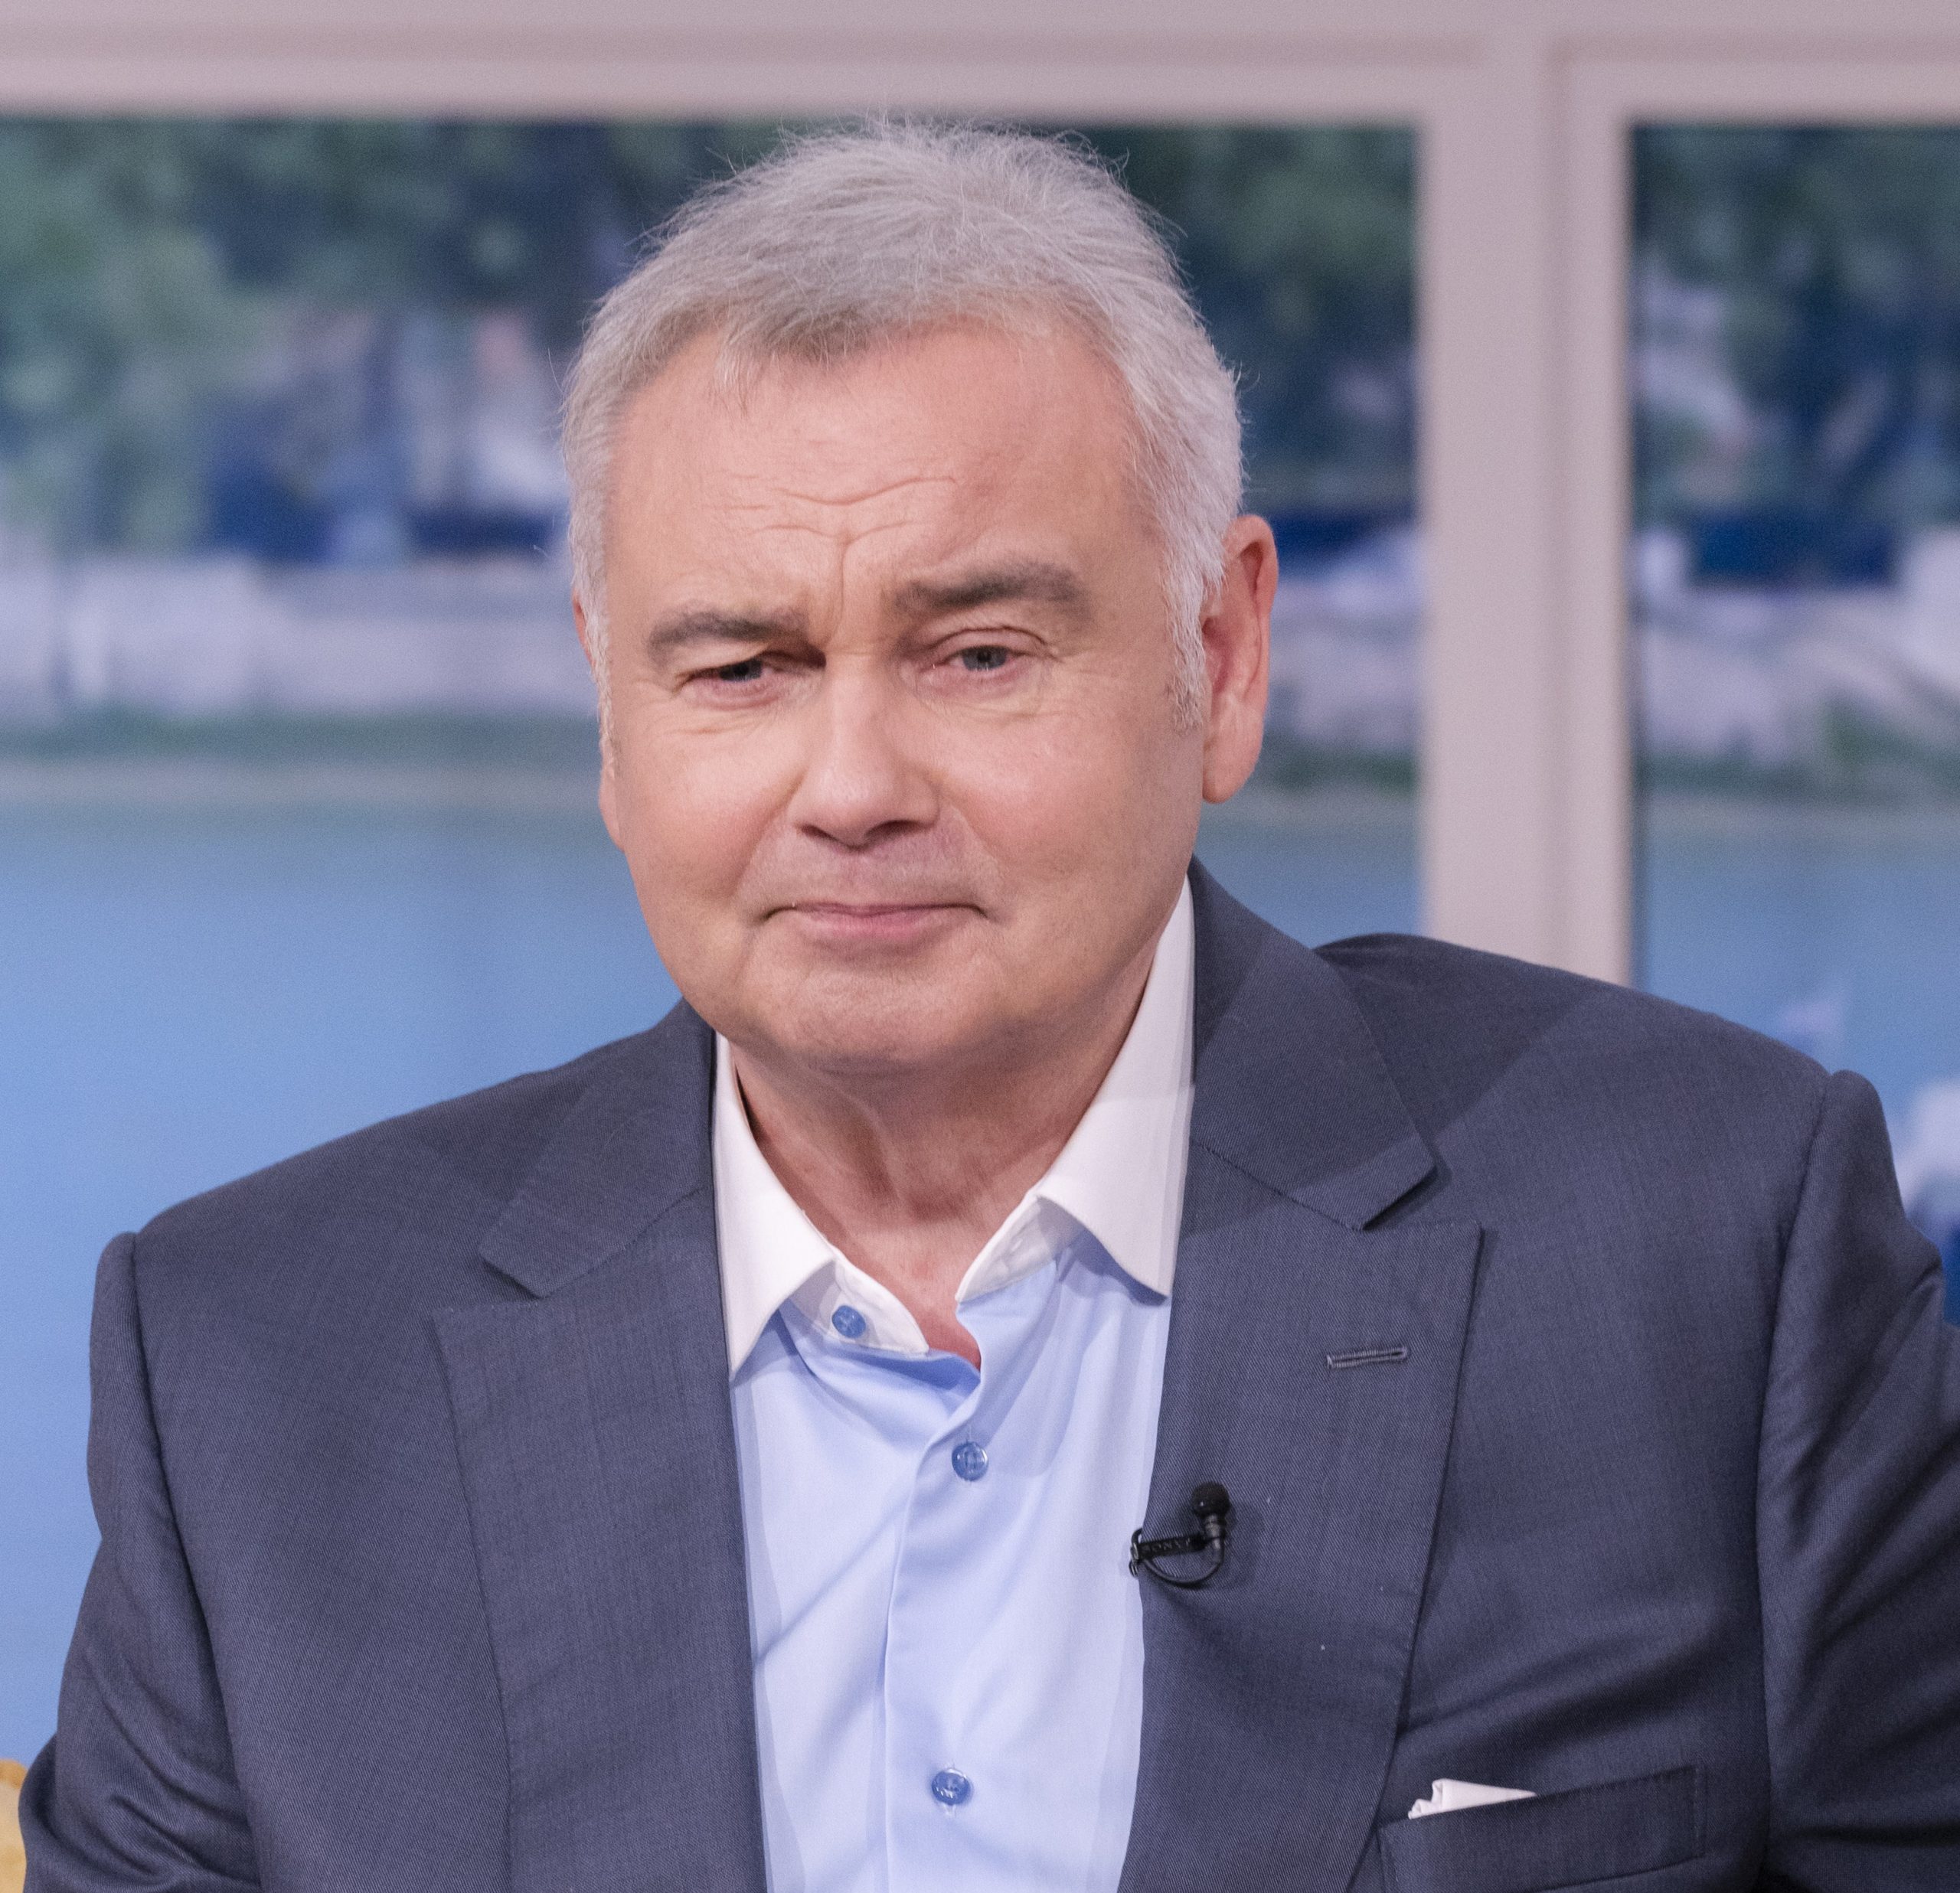 Eamonn Holmes launches fierce attack on Phillip Schofield claiming ITV staff were ‘frightened’ of the ‘controlling’ star